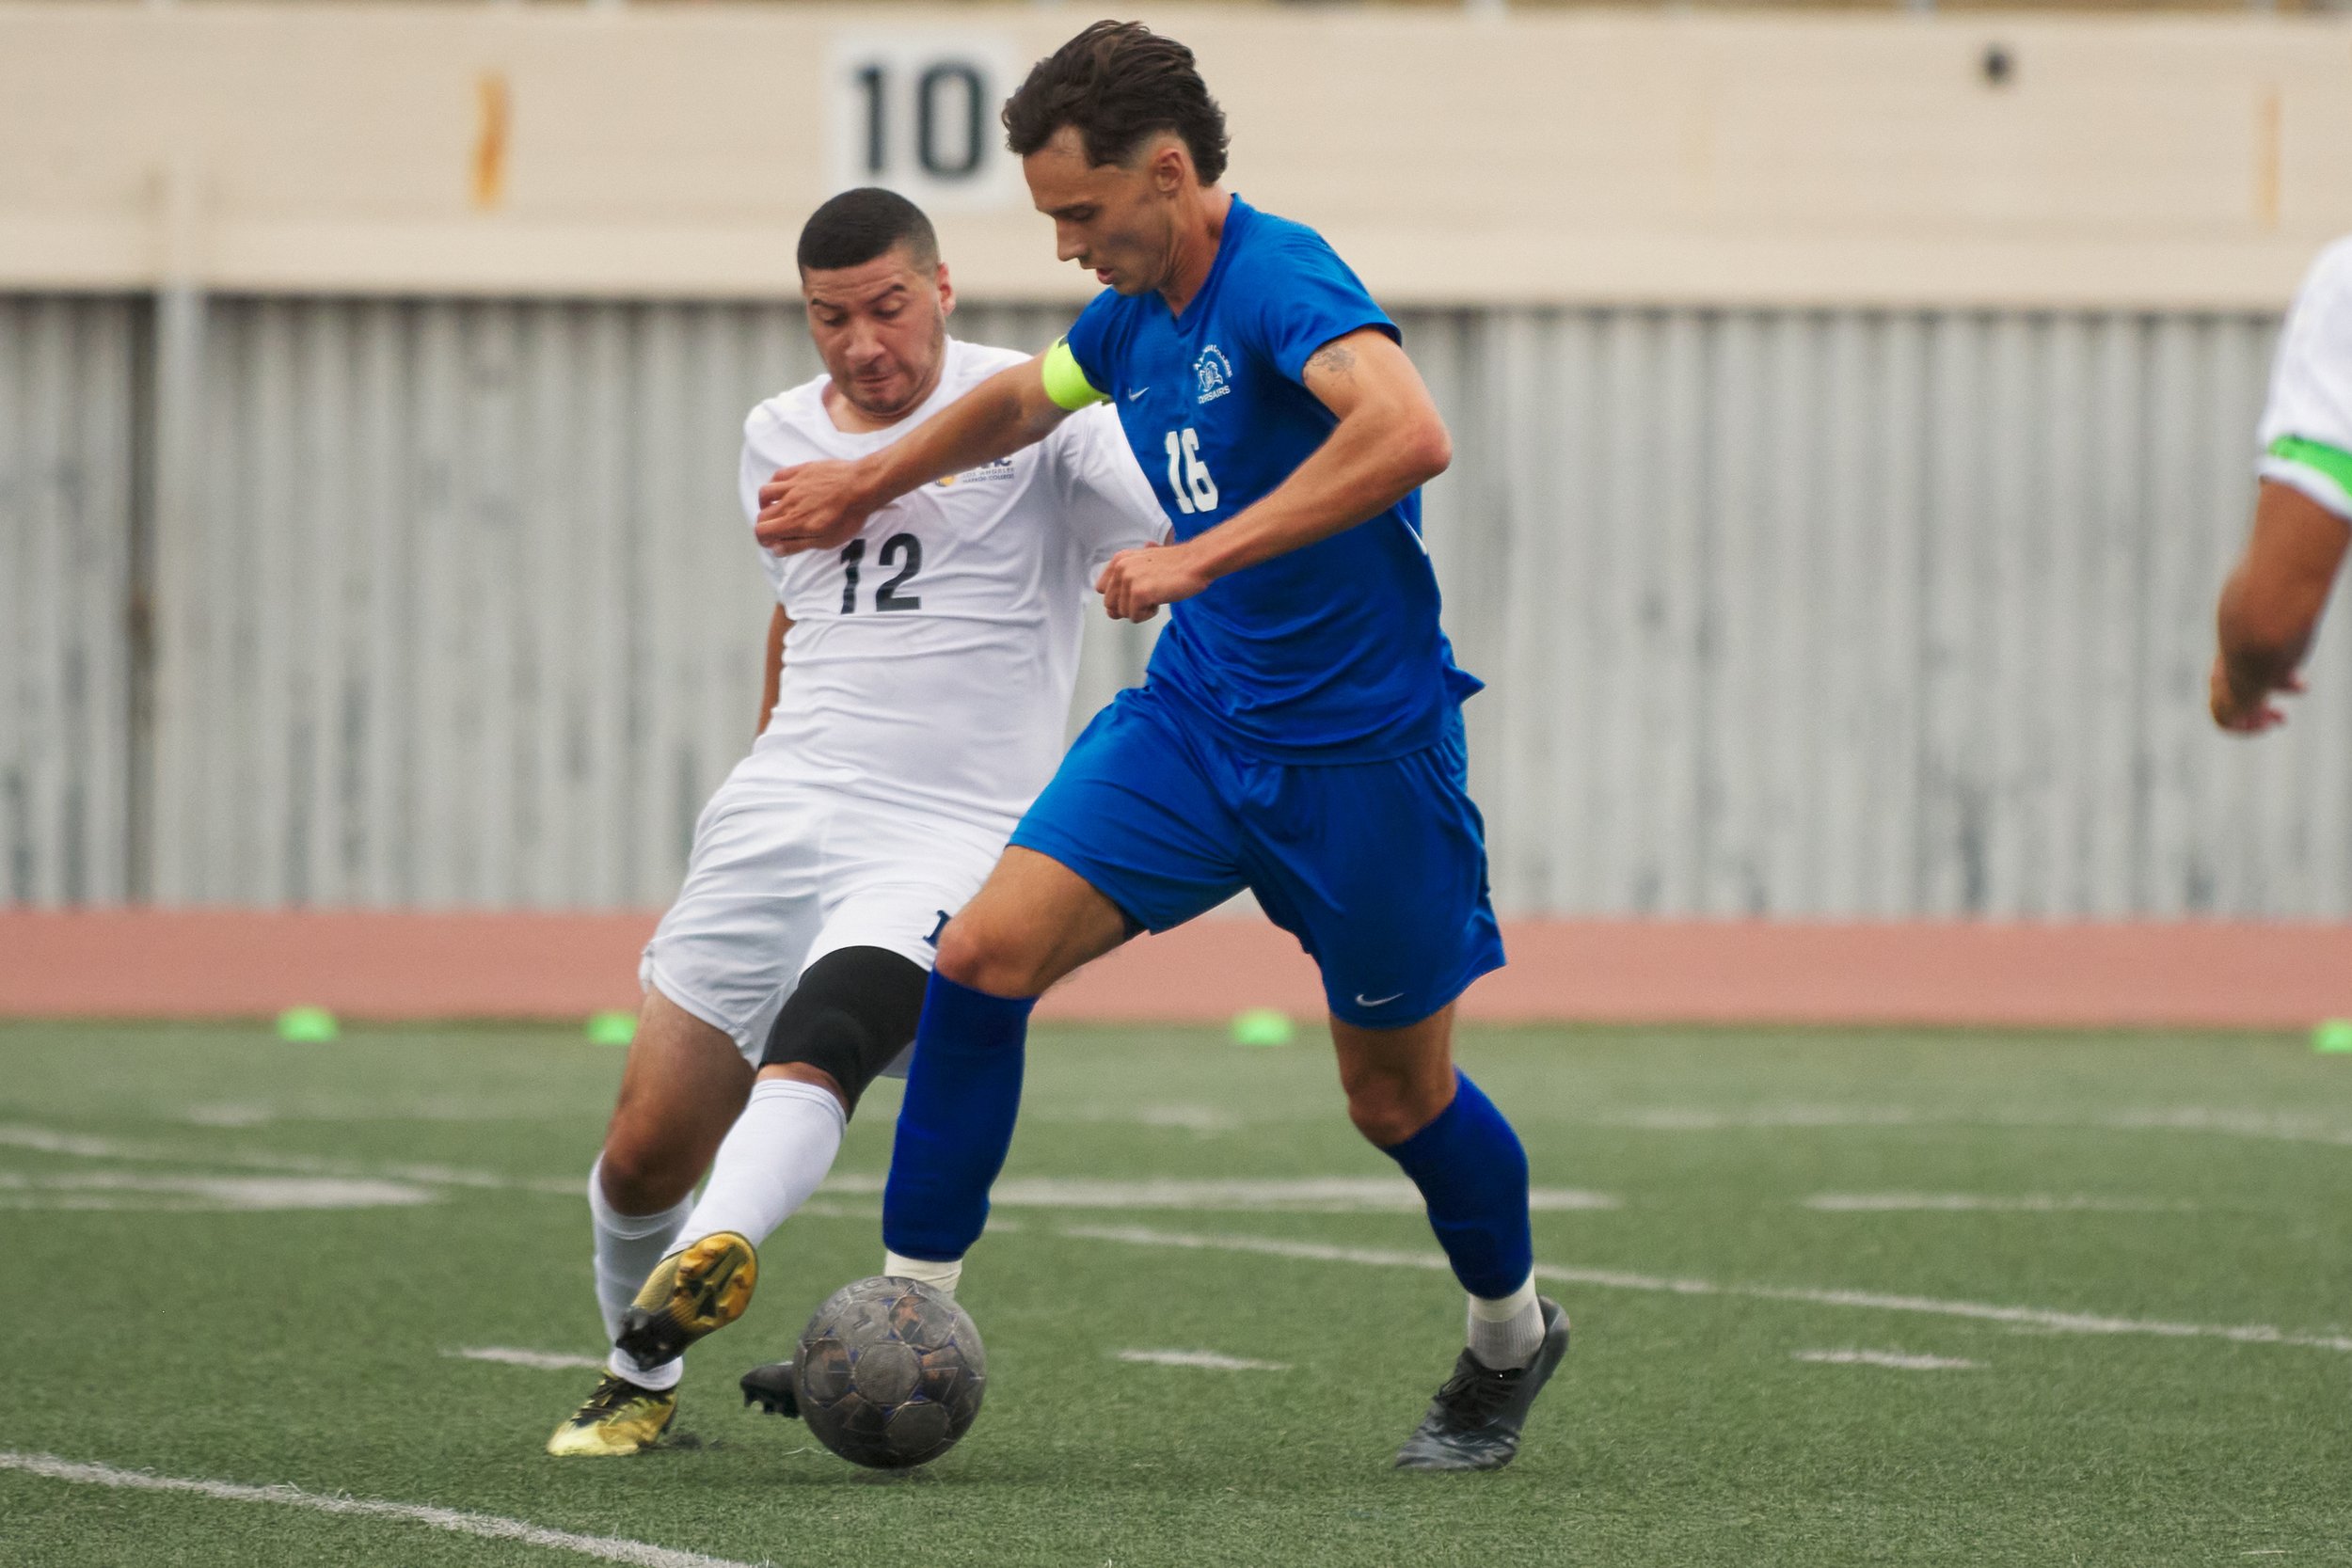  Kyler Sorber (right), of the Santa Monica College Corsairs, and Christian Palomares (left), of the Los Angeles Harbor College Seahawks, during the men's soccer match on Friday, September, 9, 2022, at Corsair Field in Santa Monica, Calif . The Corsai